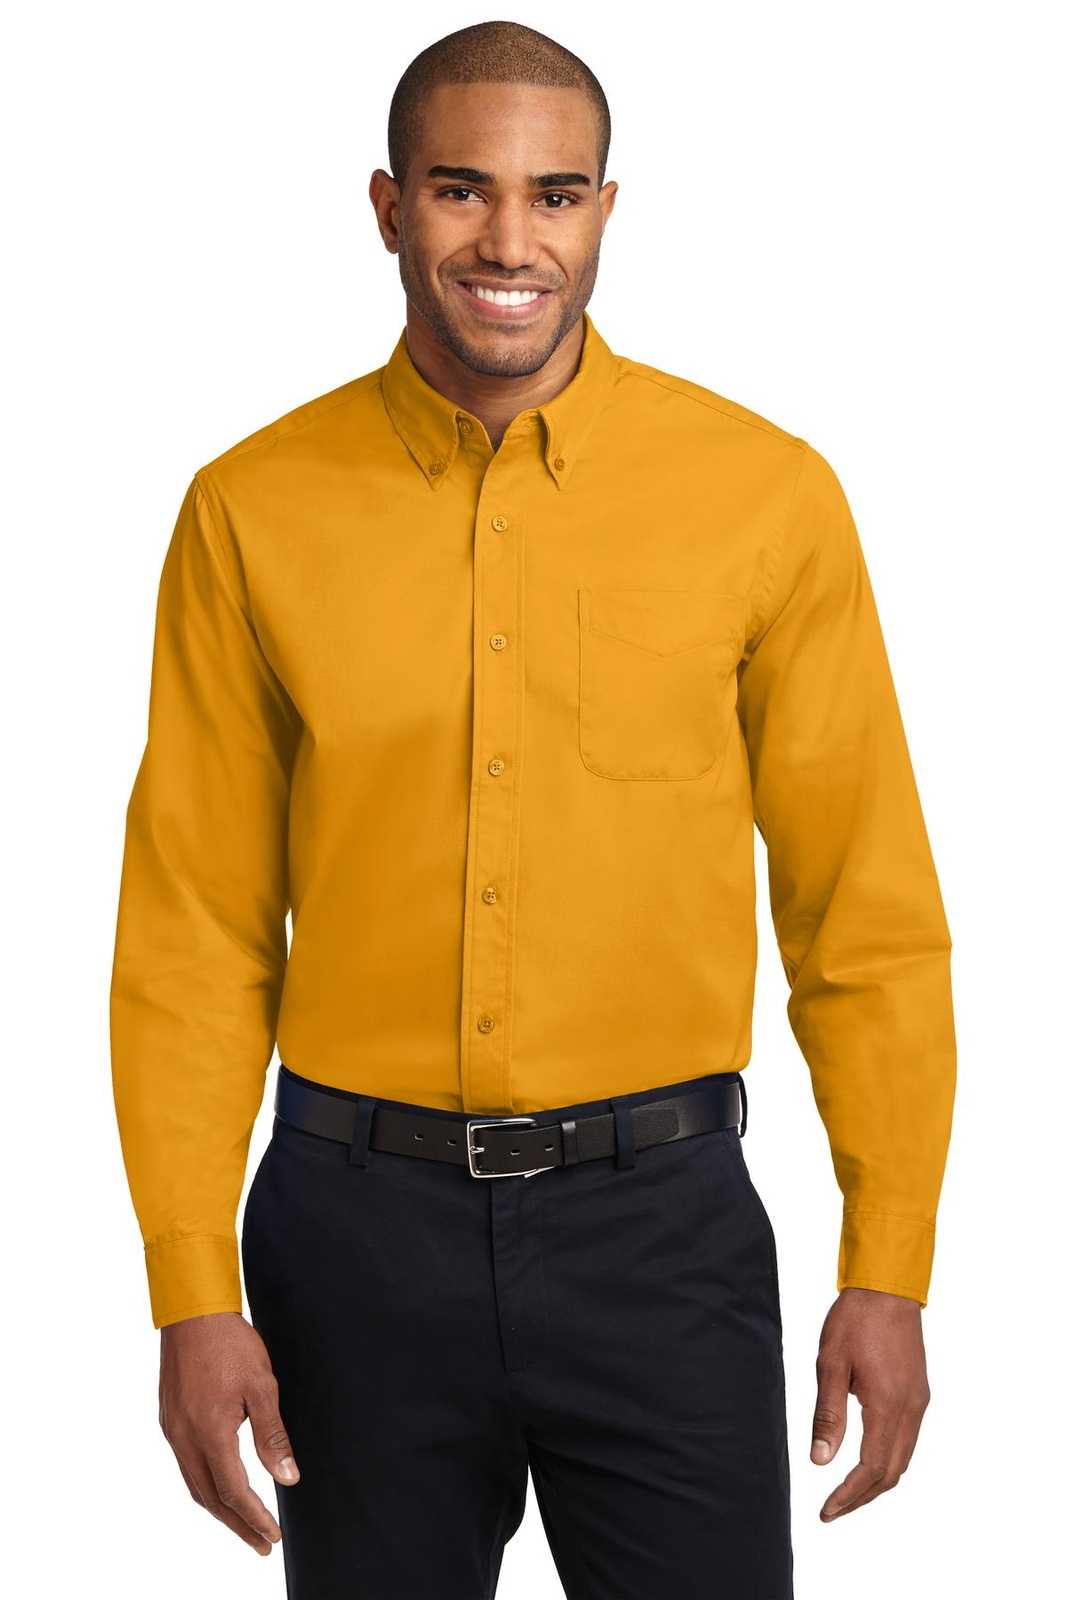 Port Authority S608 Long Sleeve Easy Care Shirt - Athletic Gold Light Stone - HIT a Double - 1